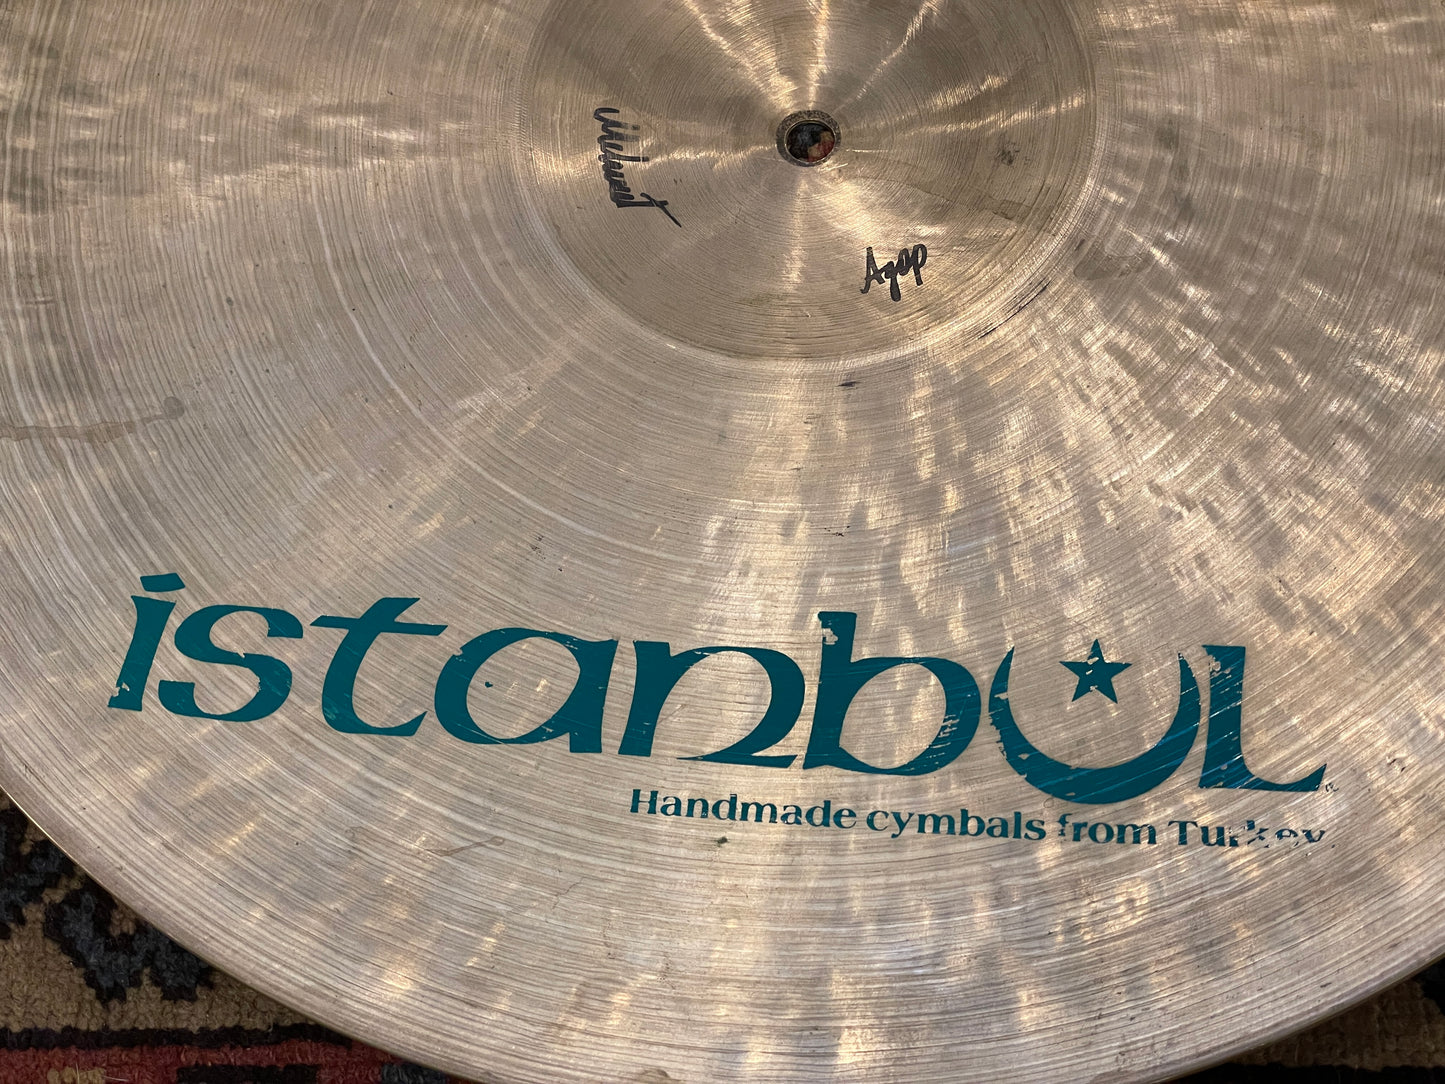 20" Istanbul Pre-Split Green Label Ping Ride Cymbal 3220g Vinnie Colaiuta Signed